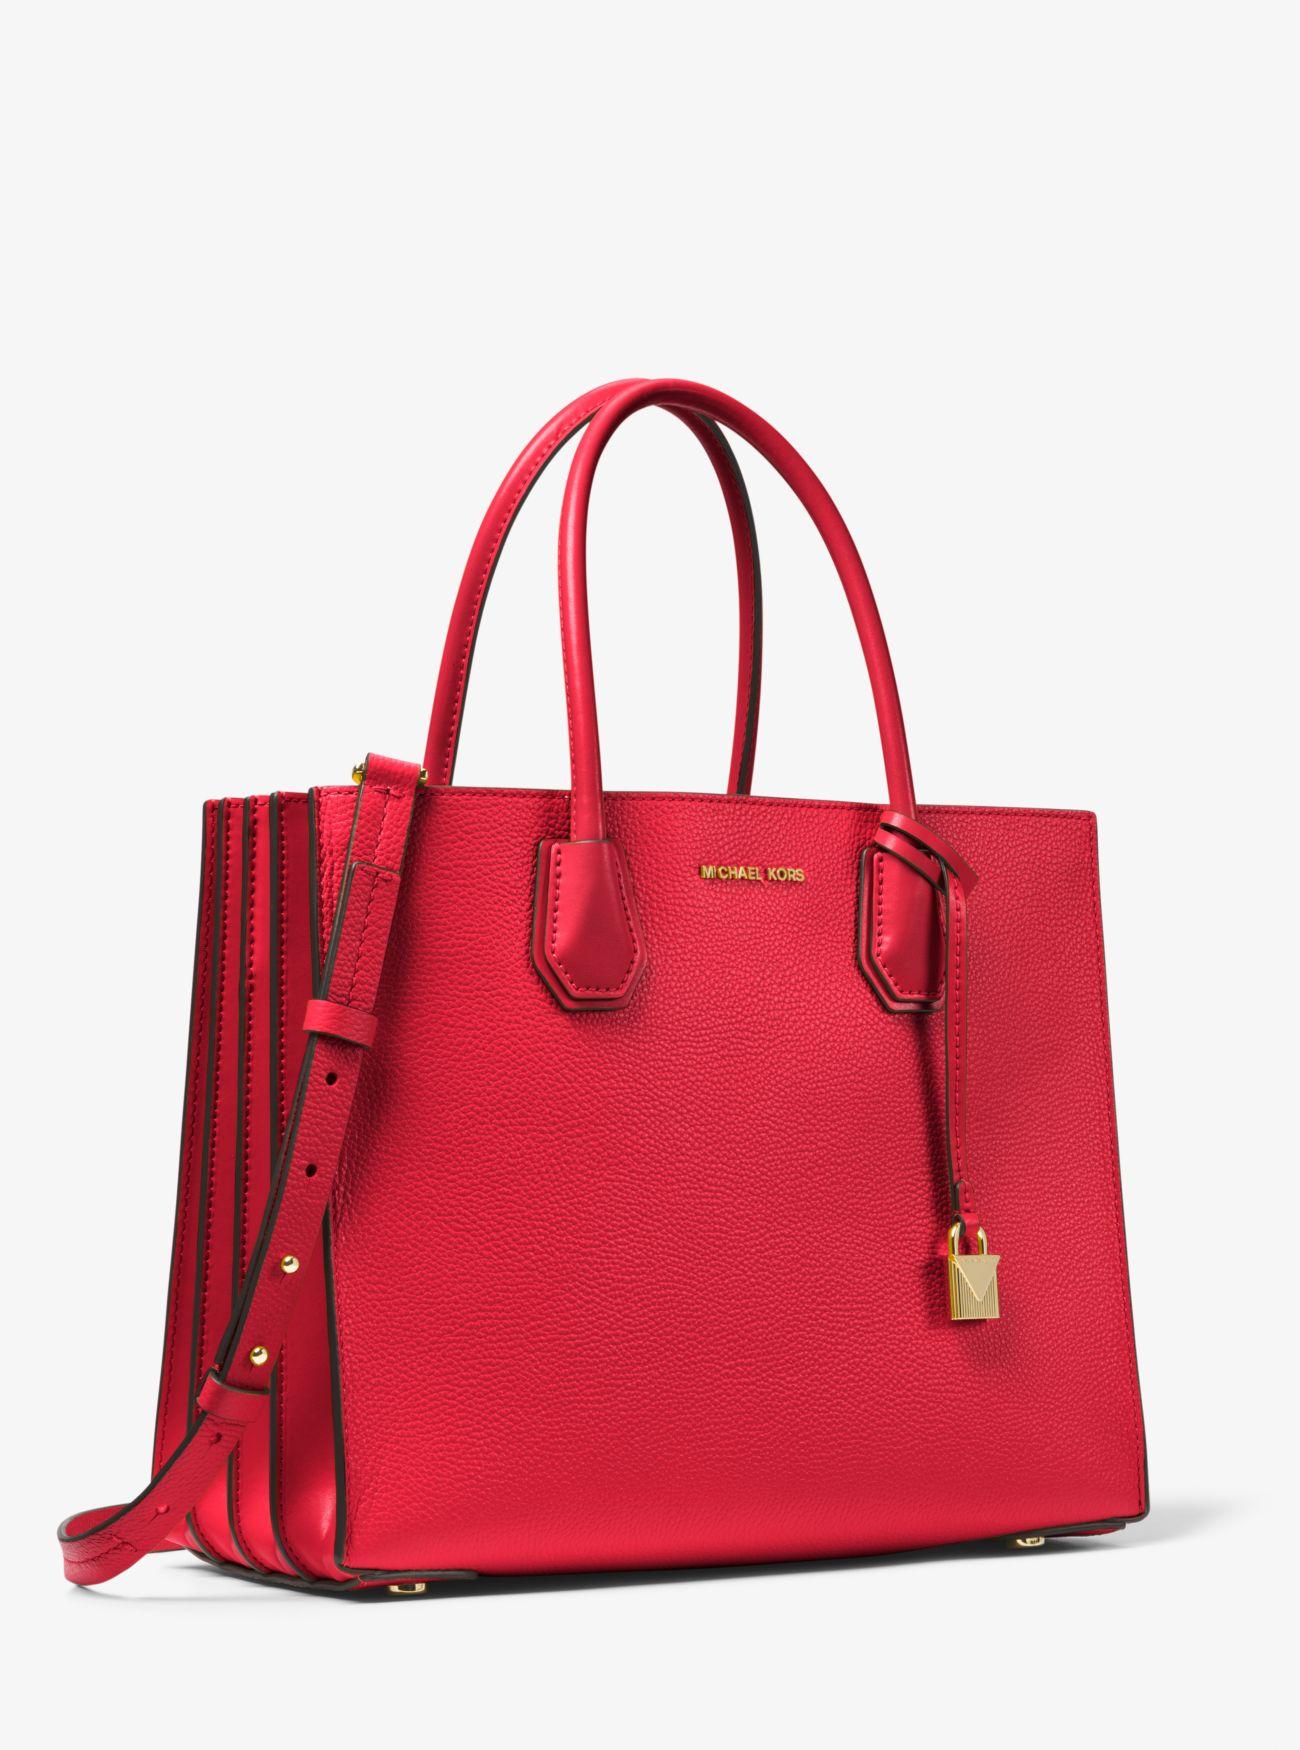 MICHAEL Michael Kors Mercer Large Pebbled Leather Accordion Tote Bag in Red - Lyst